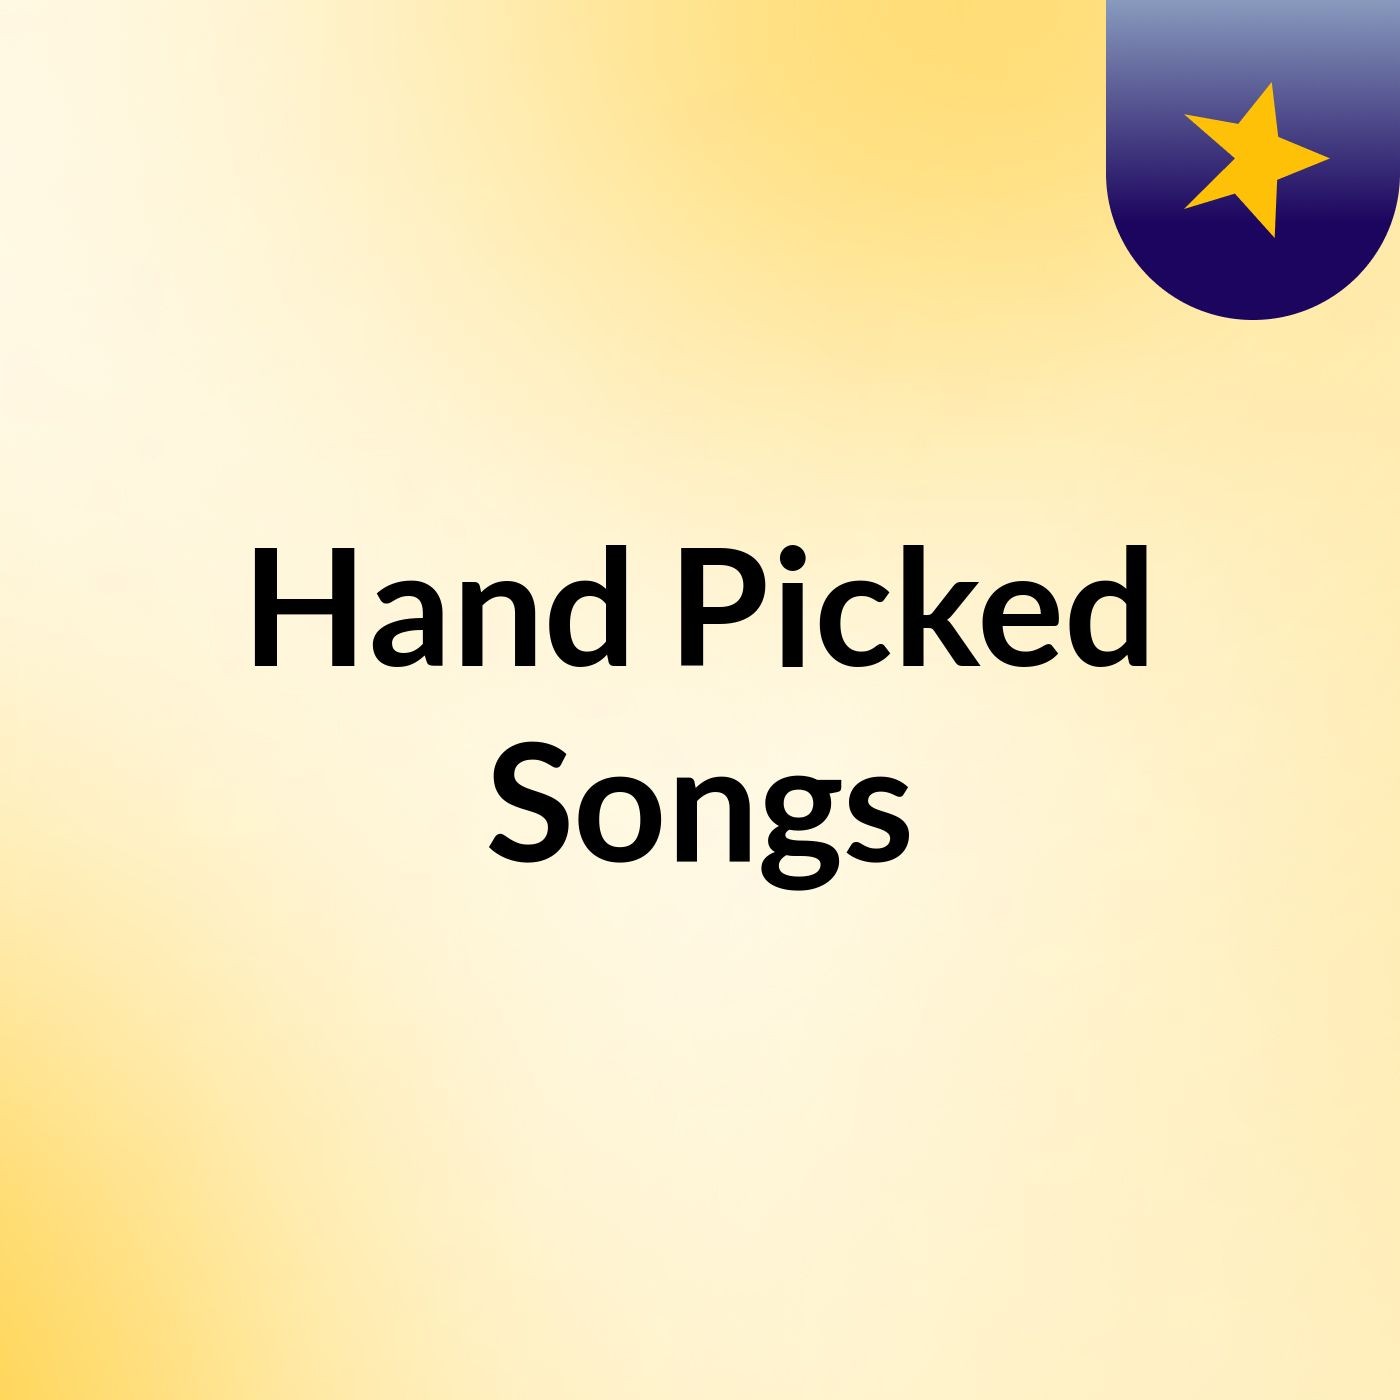 Hand Picked Songs